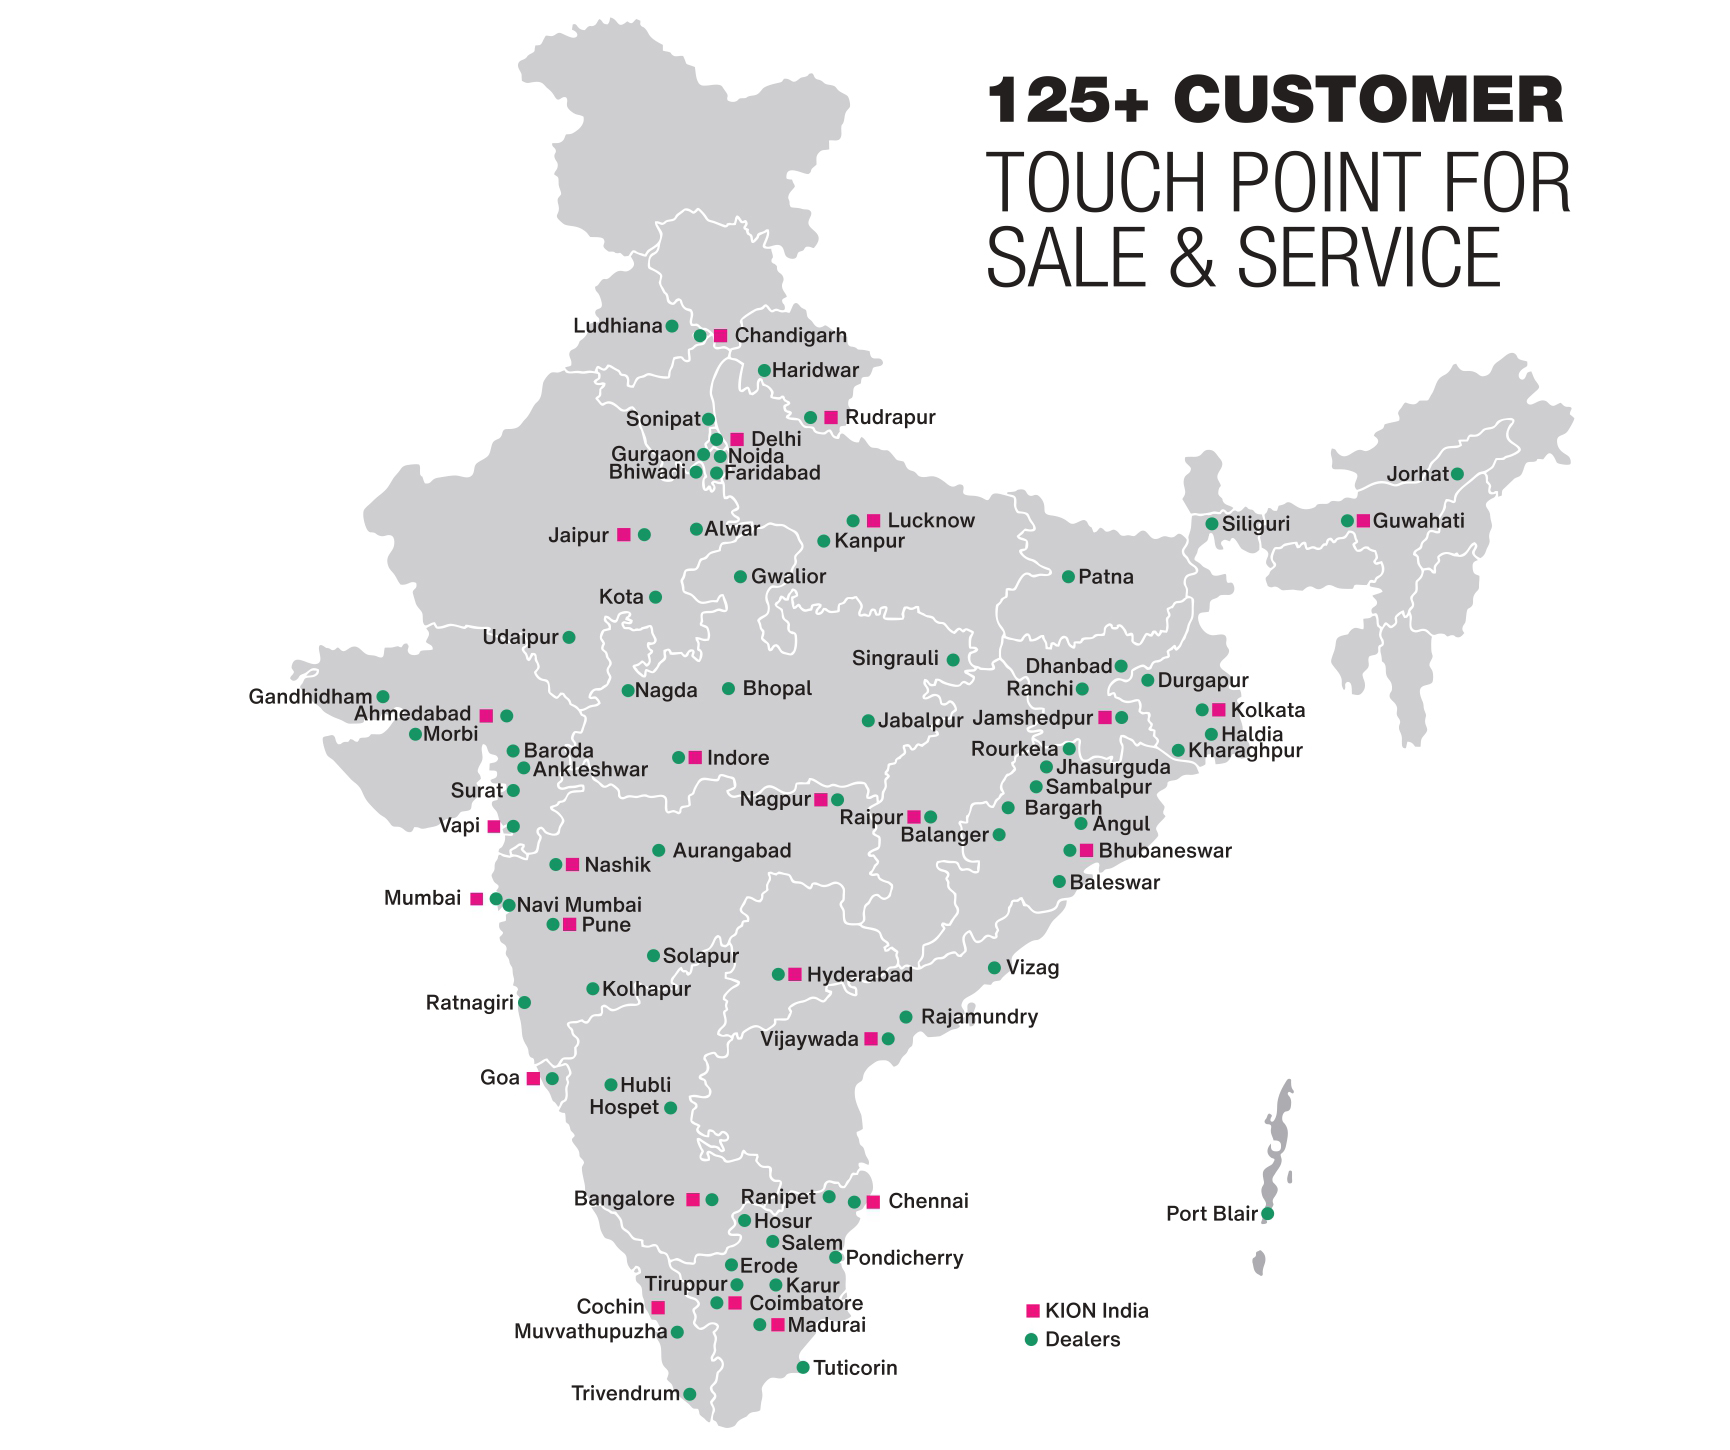 Touchpoints for Sales & Services